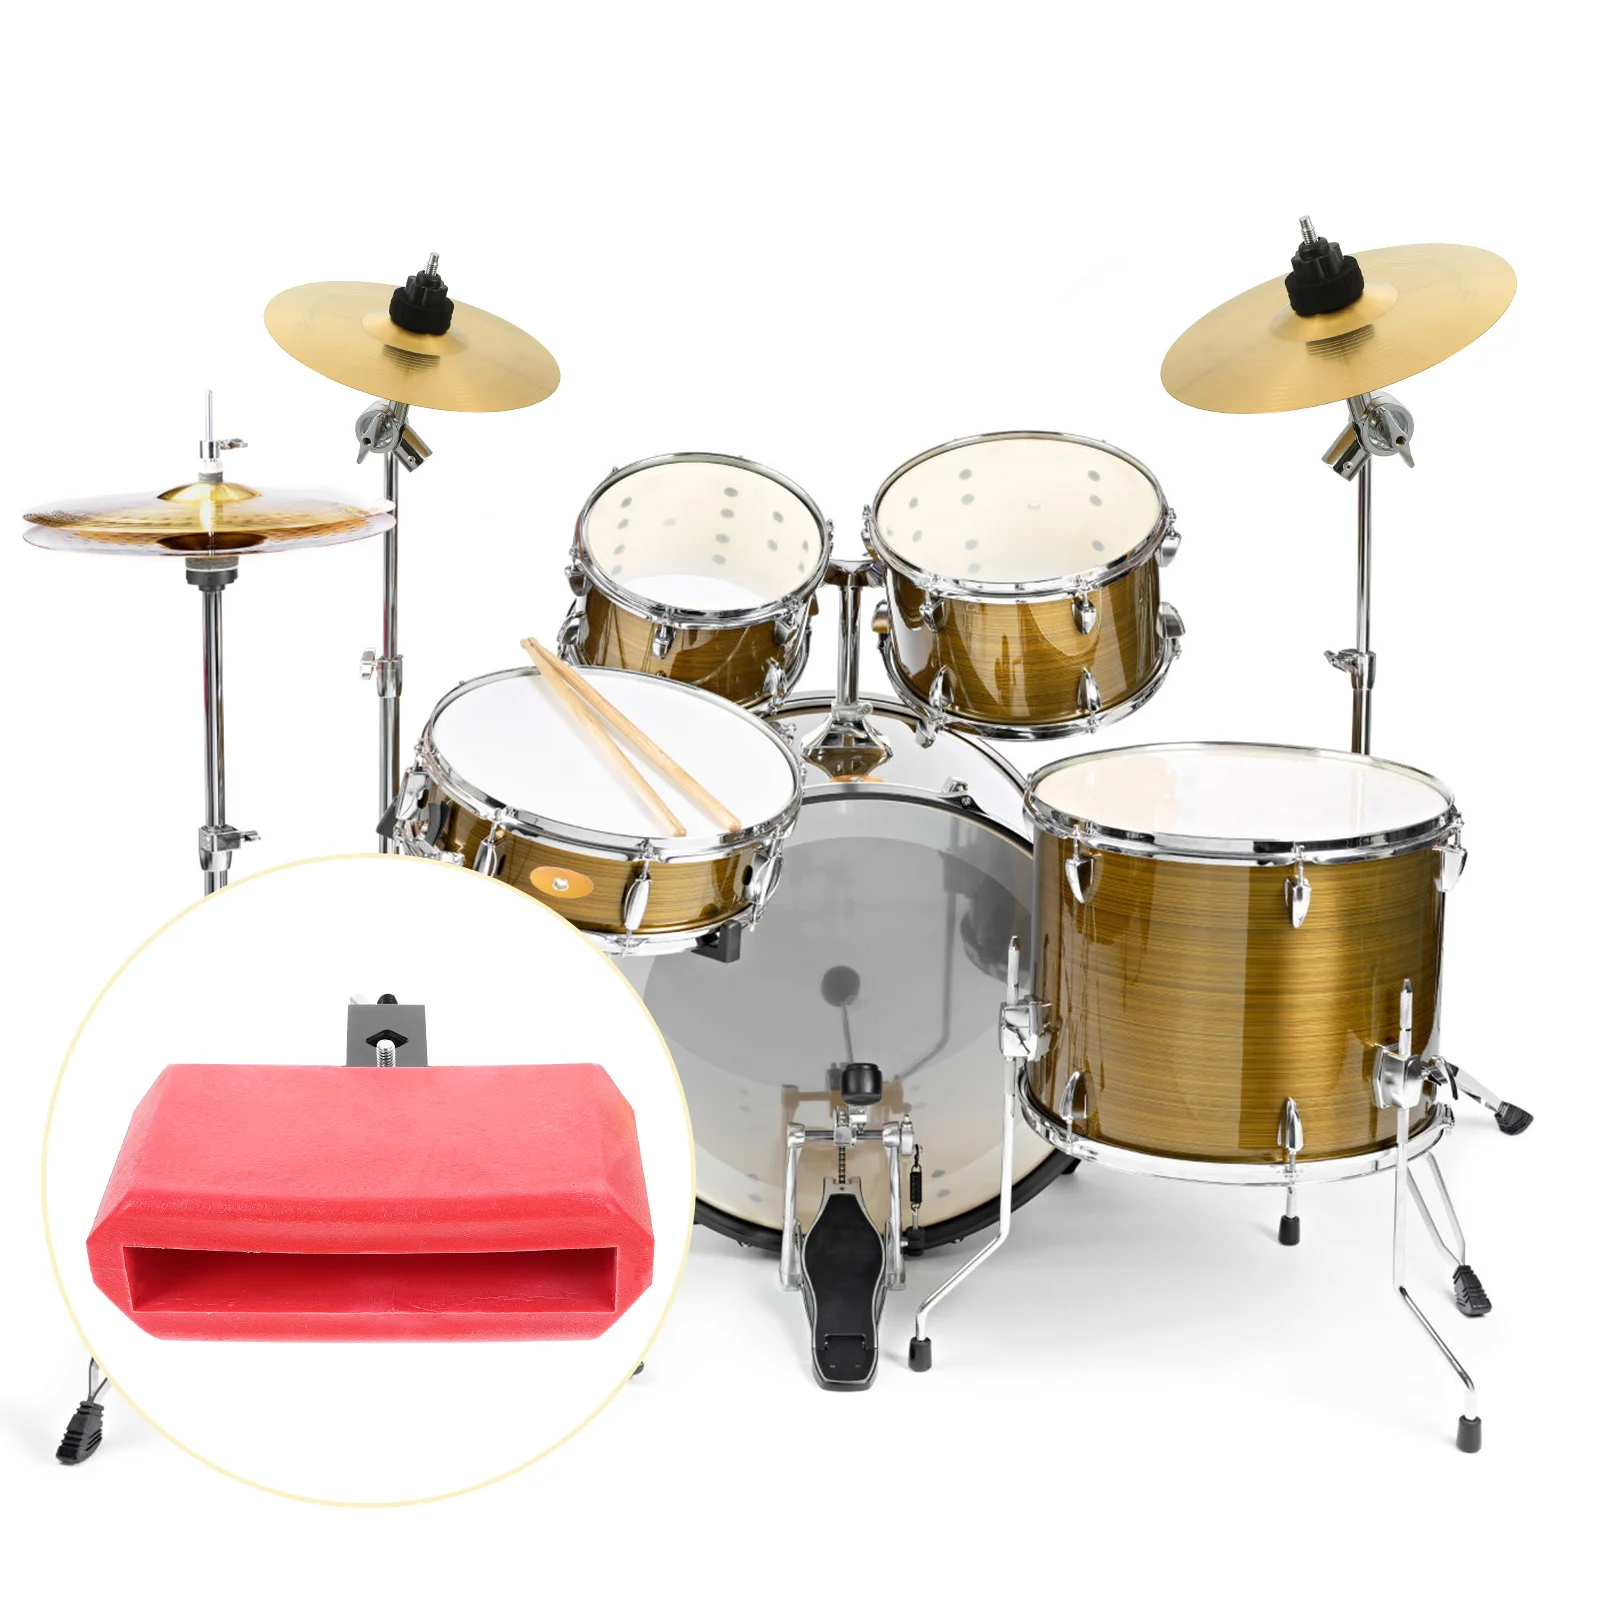 

Plastic Latin Percussion Portable Drum Percussion Musical Accessory Cow Bell Durable Drum Accessory (Red) Accessories Drums